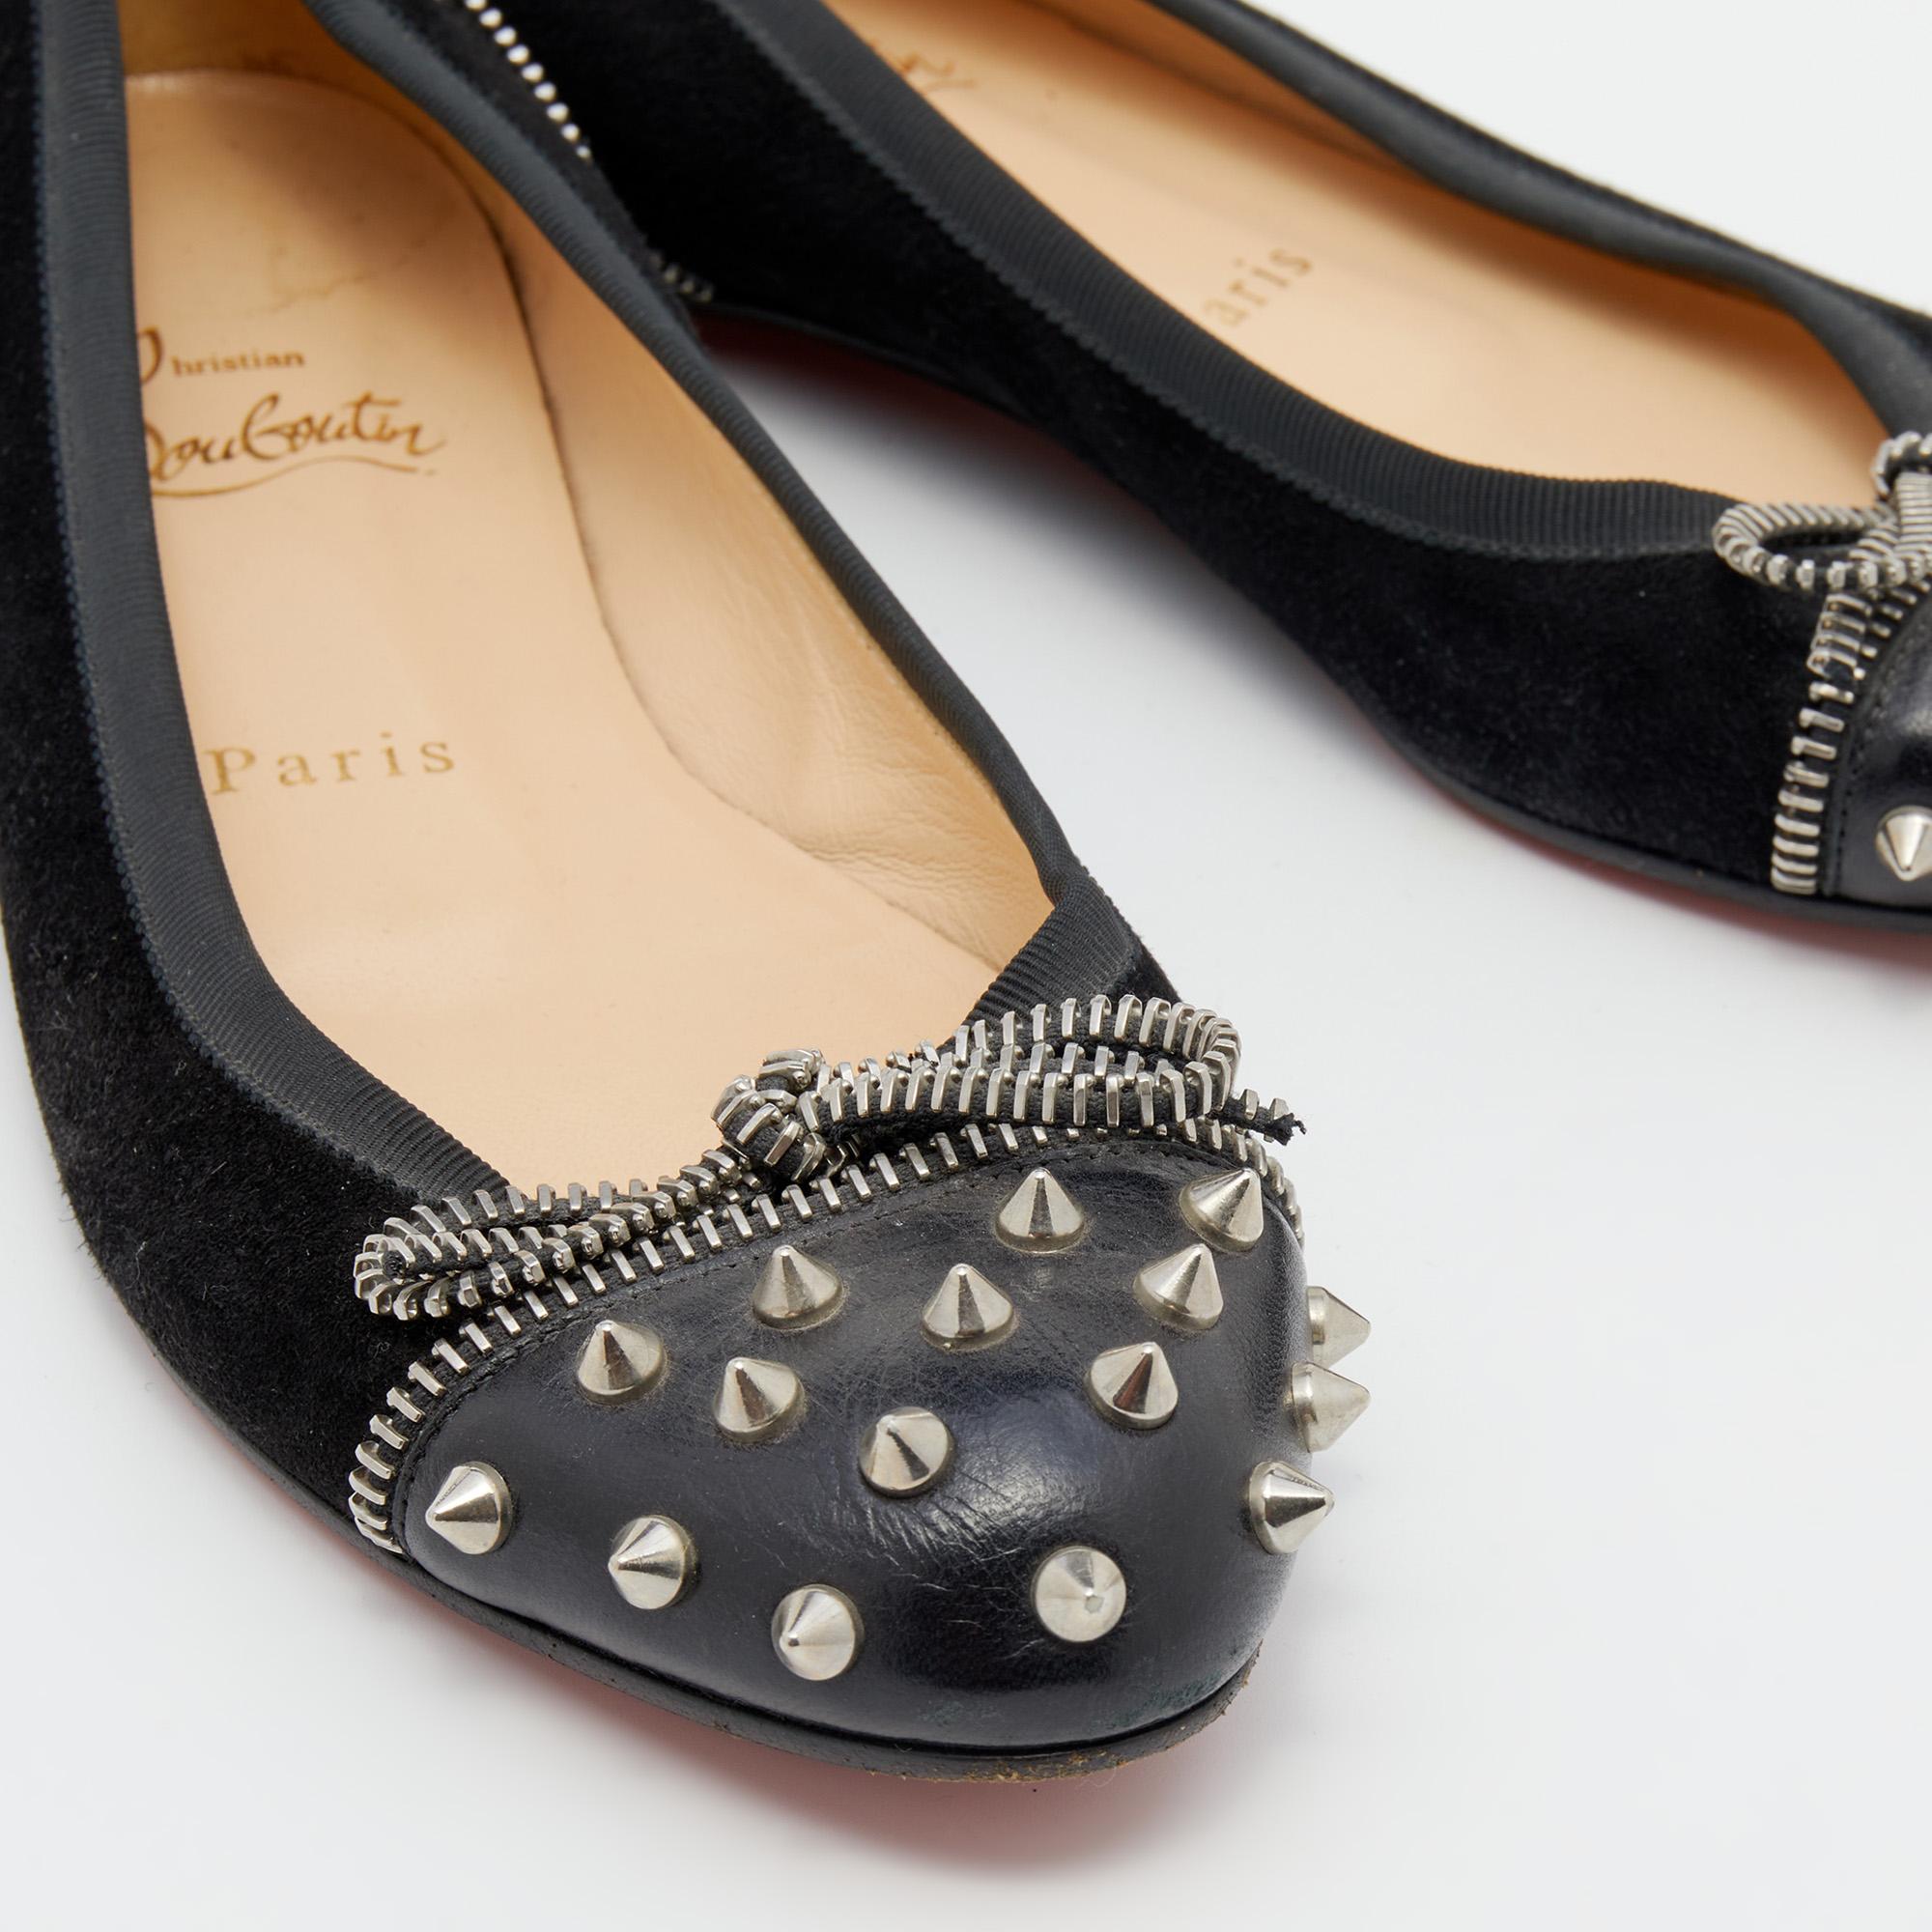 Christian Louboutin Black Suede and Leather Spiked Zipper Ballet Flats Size 36.5 1